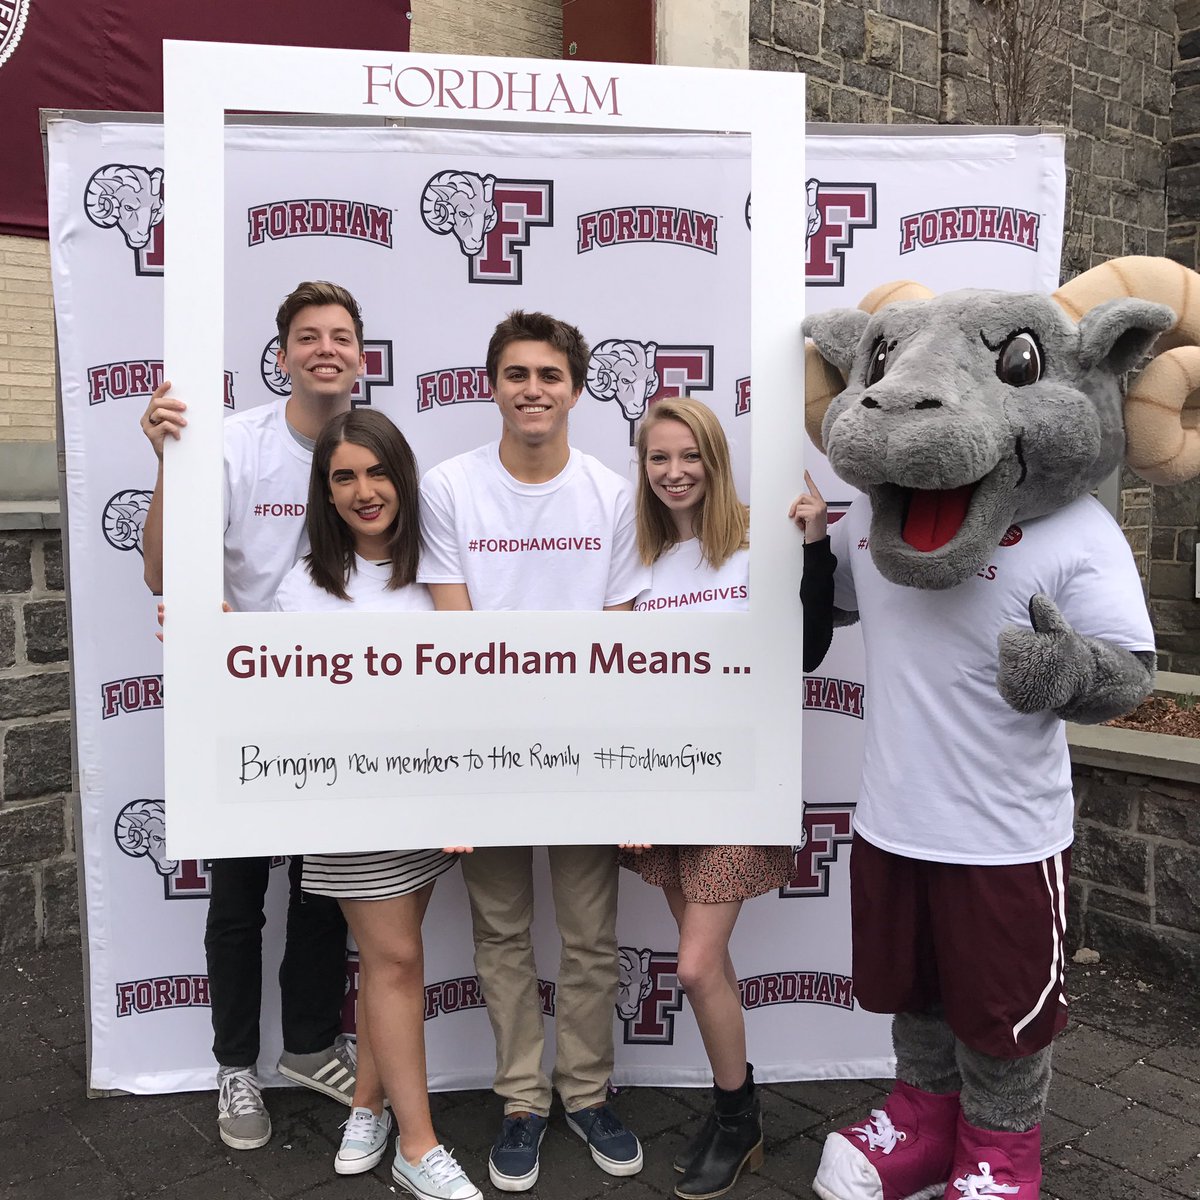 Last year, orientation coordinators were one of many Fordham groups that participated in Fordham's Giving Day.